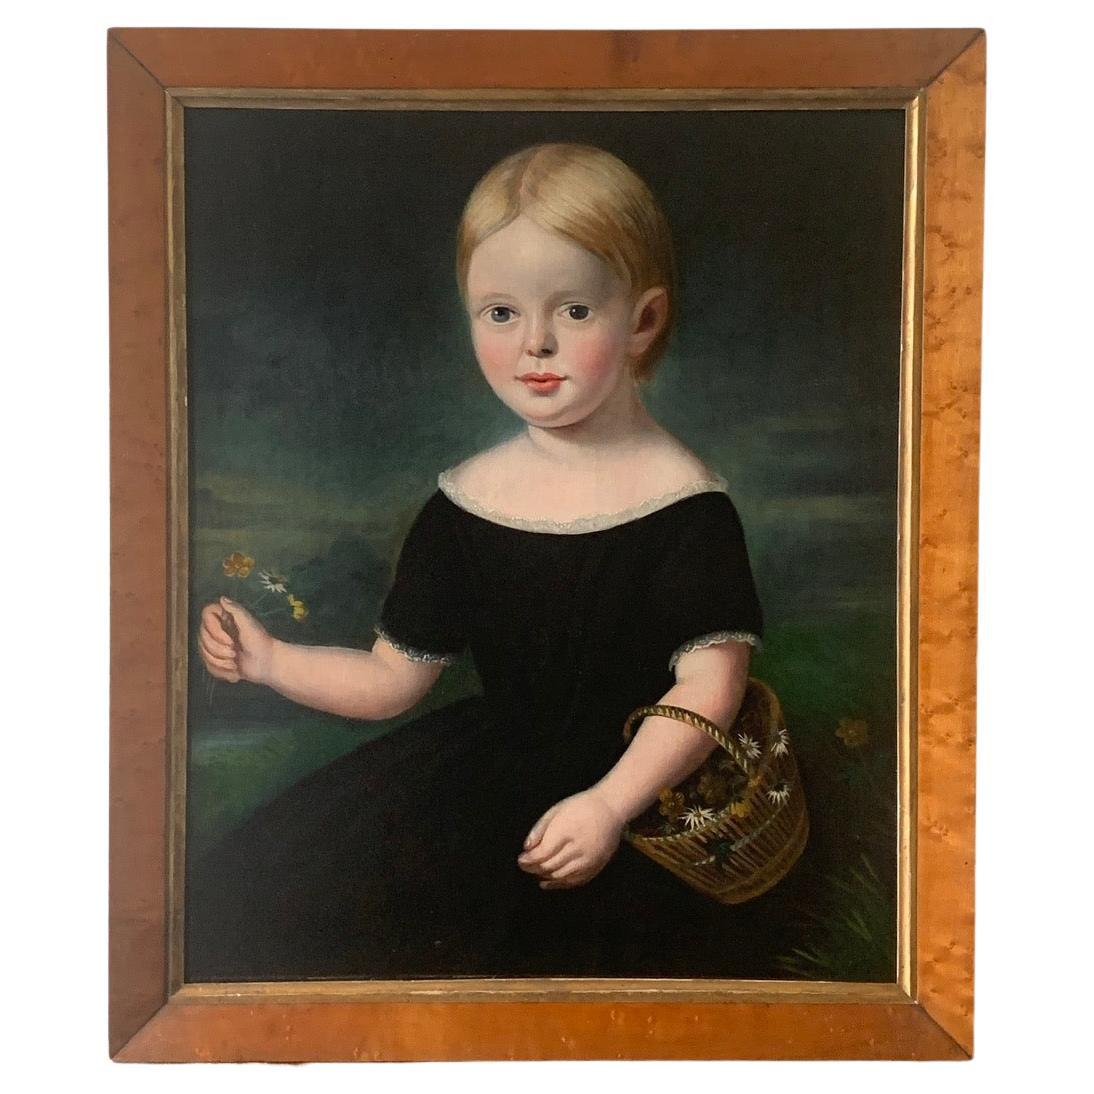 19th Century Folk Art Portrait Painting Of A Young Girl